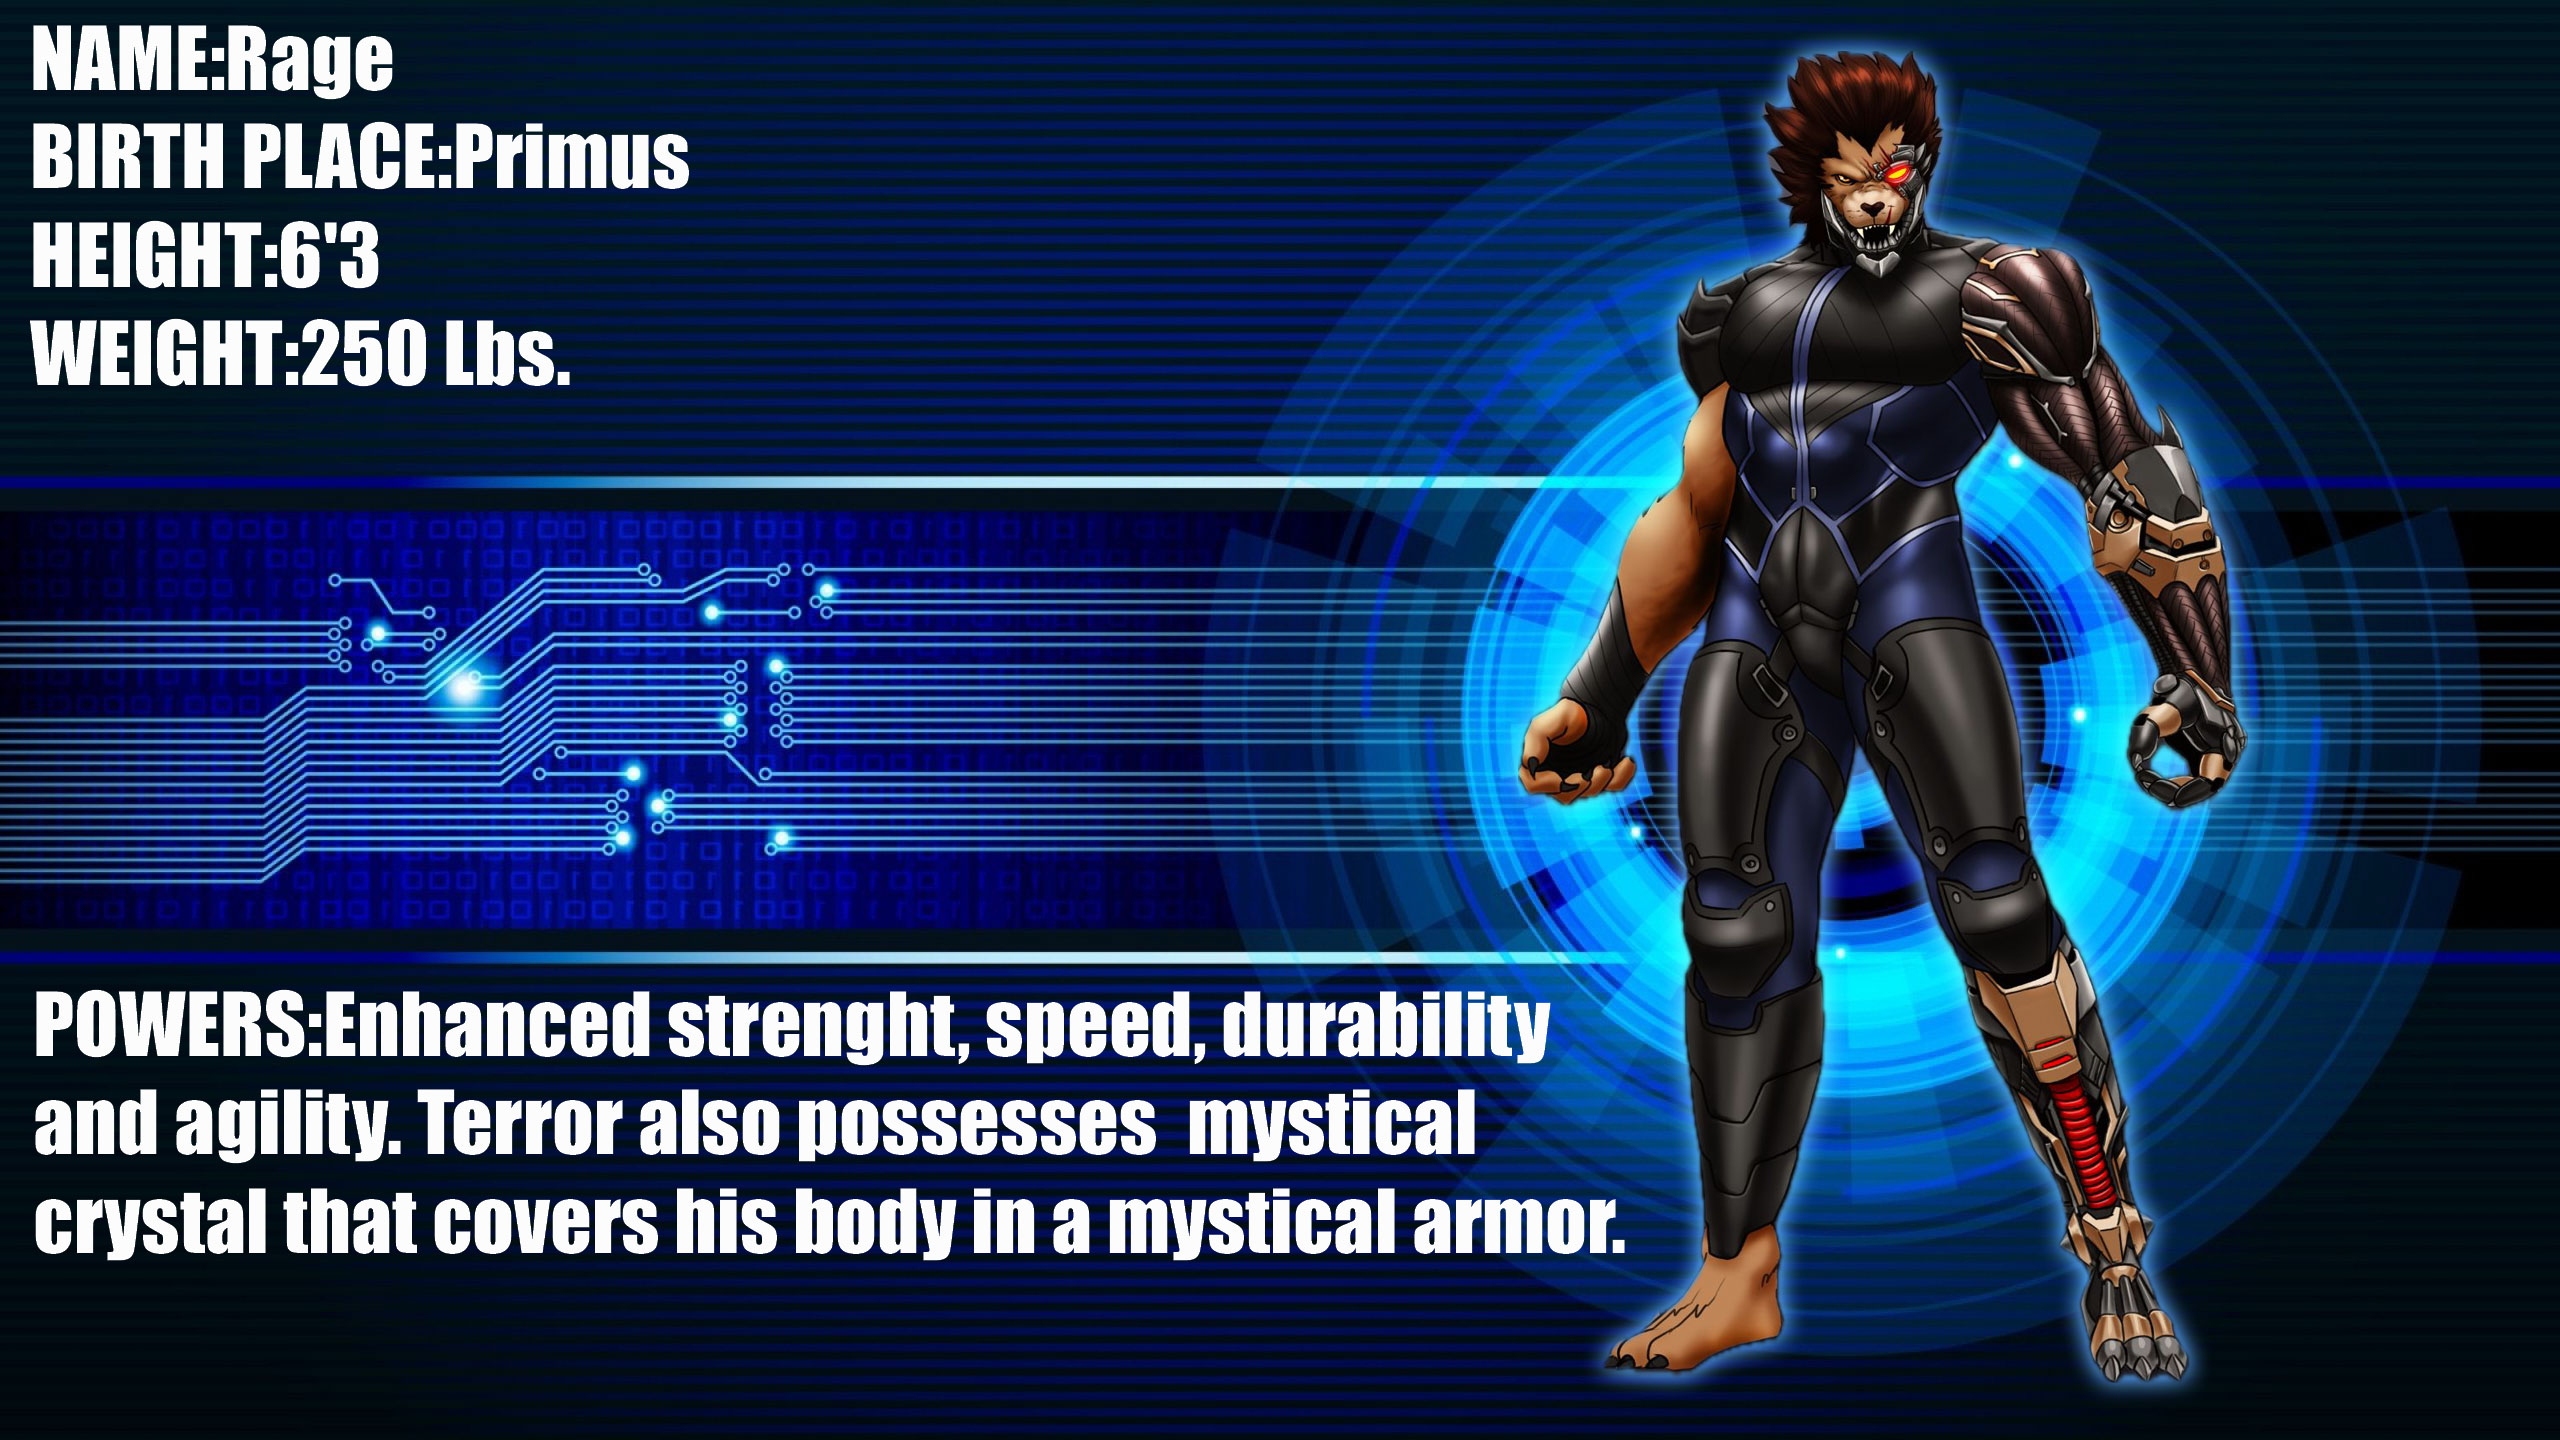 A character from the video game tekken.